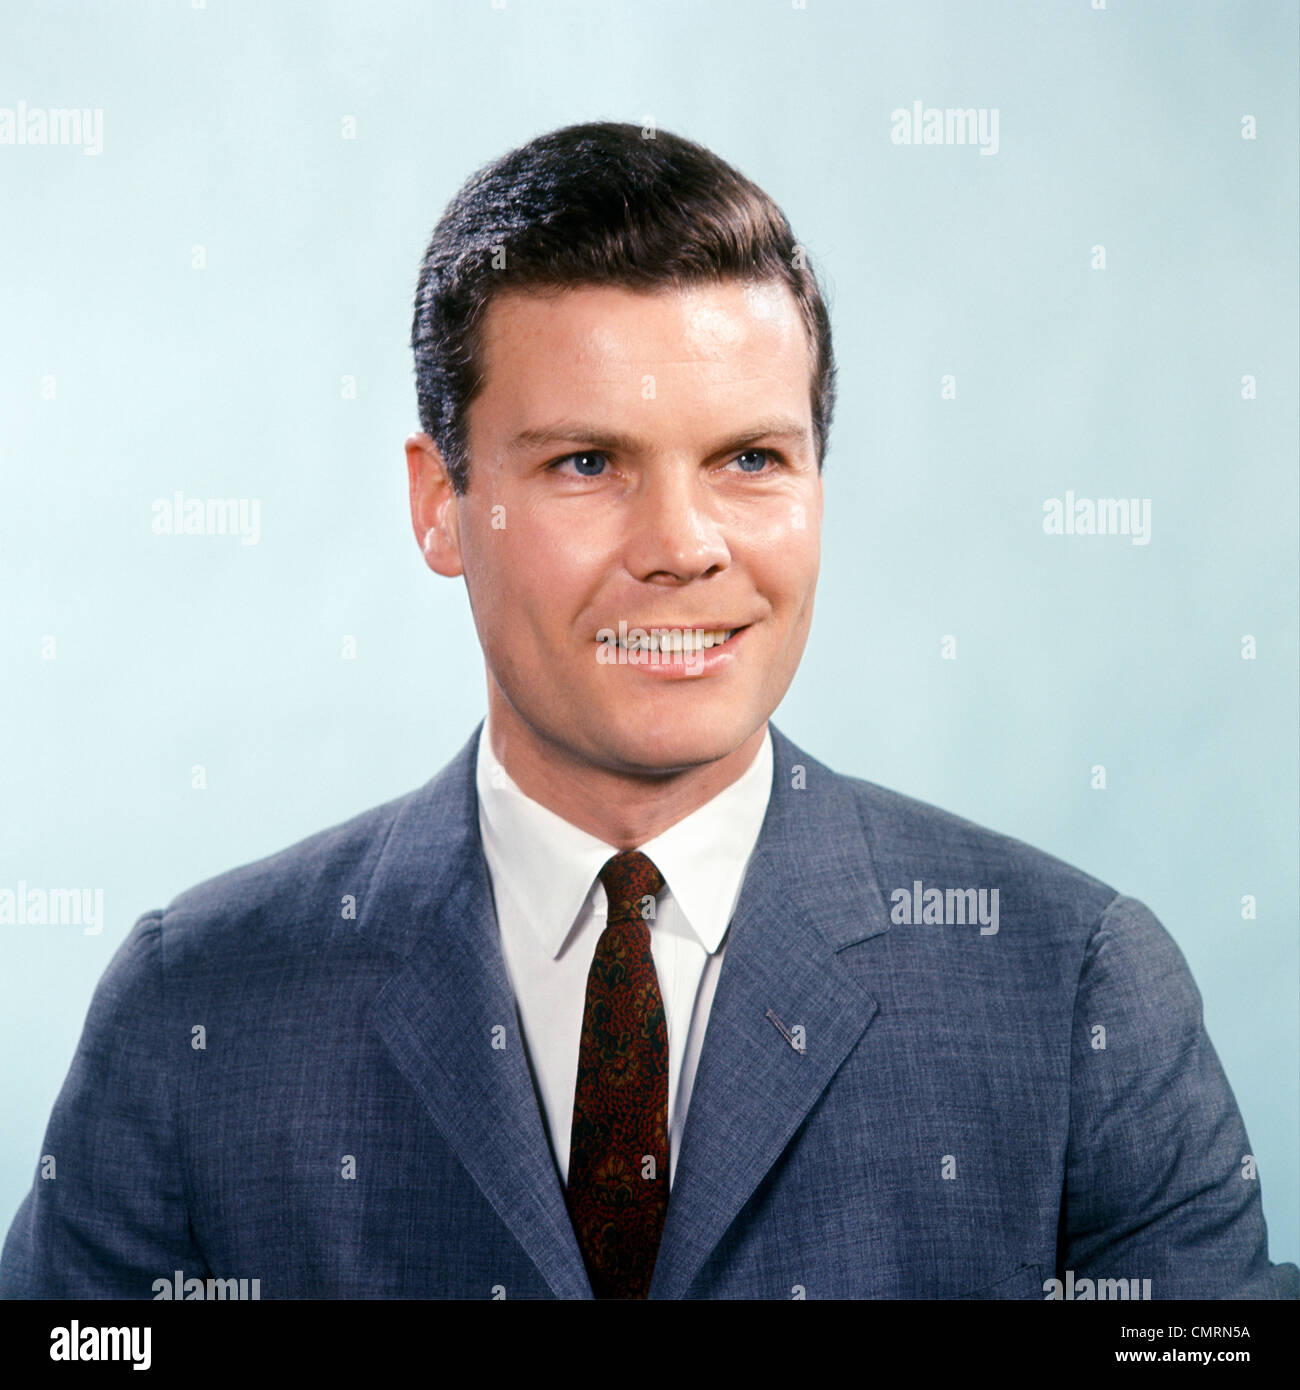 1960 1960s RETRO PORTRAIT SMILING MAN WEARING BLUE GREY SUIT AND TIE Stock Photo